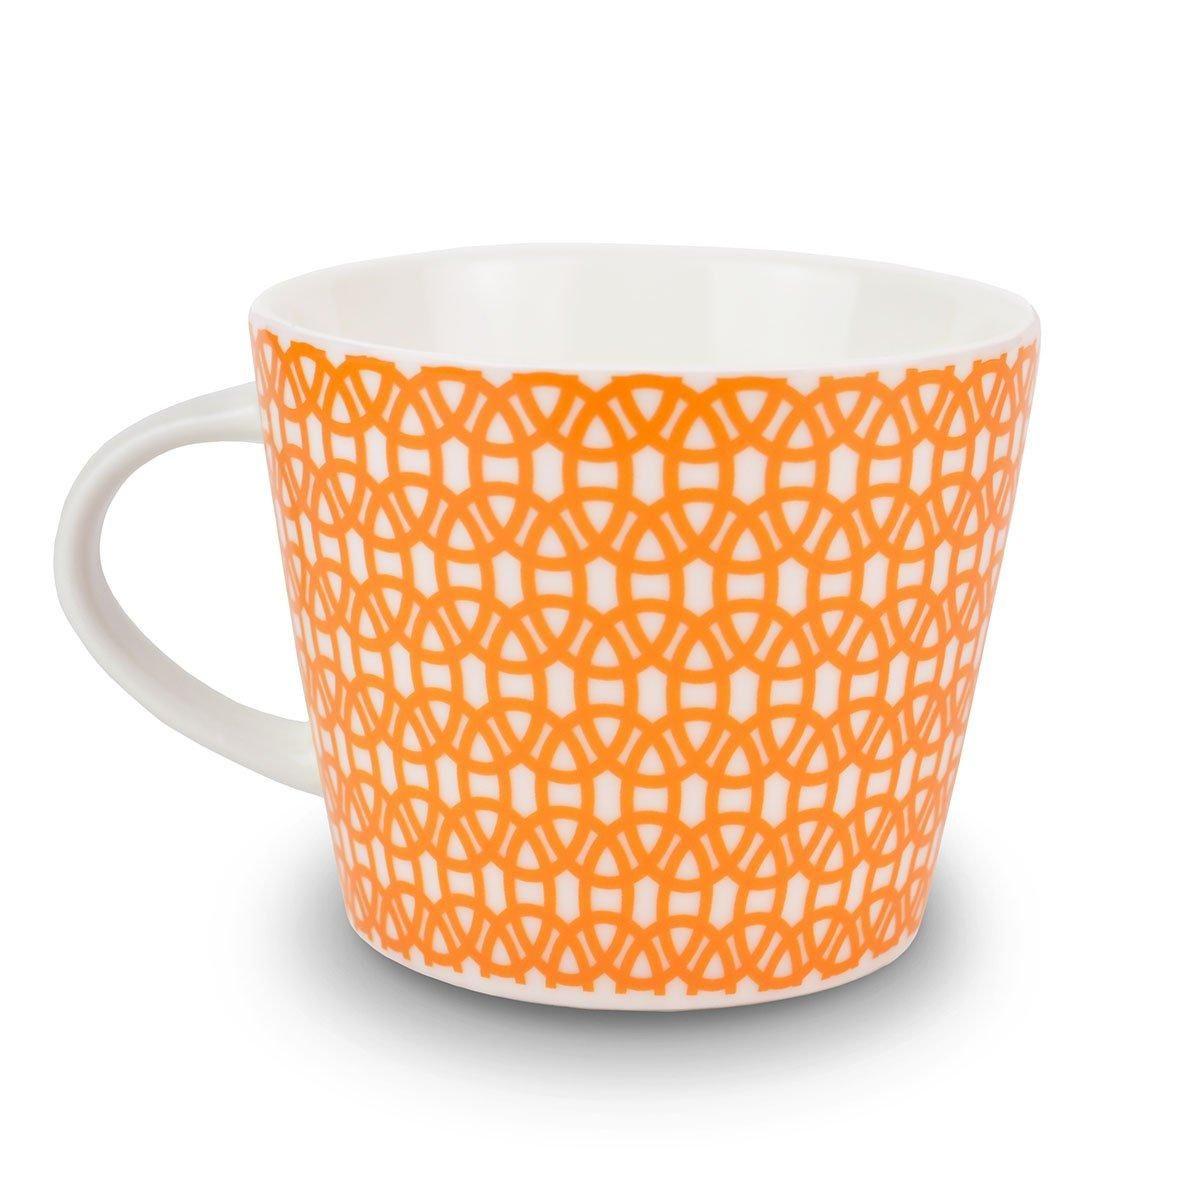  Mugs And Cups SC-0017 